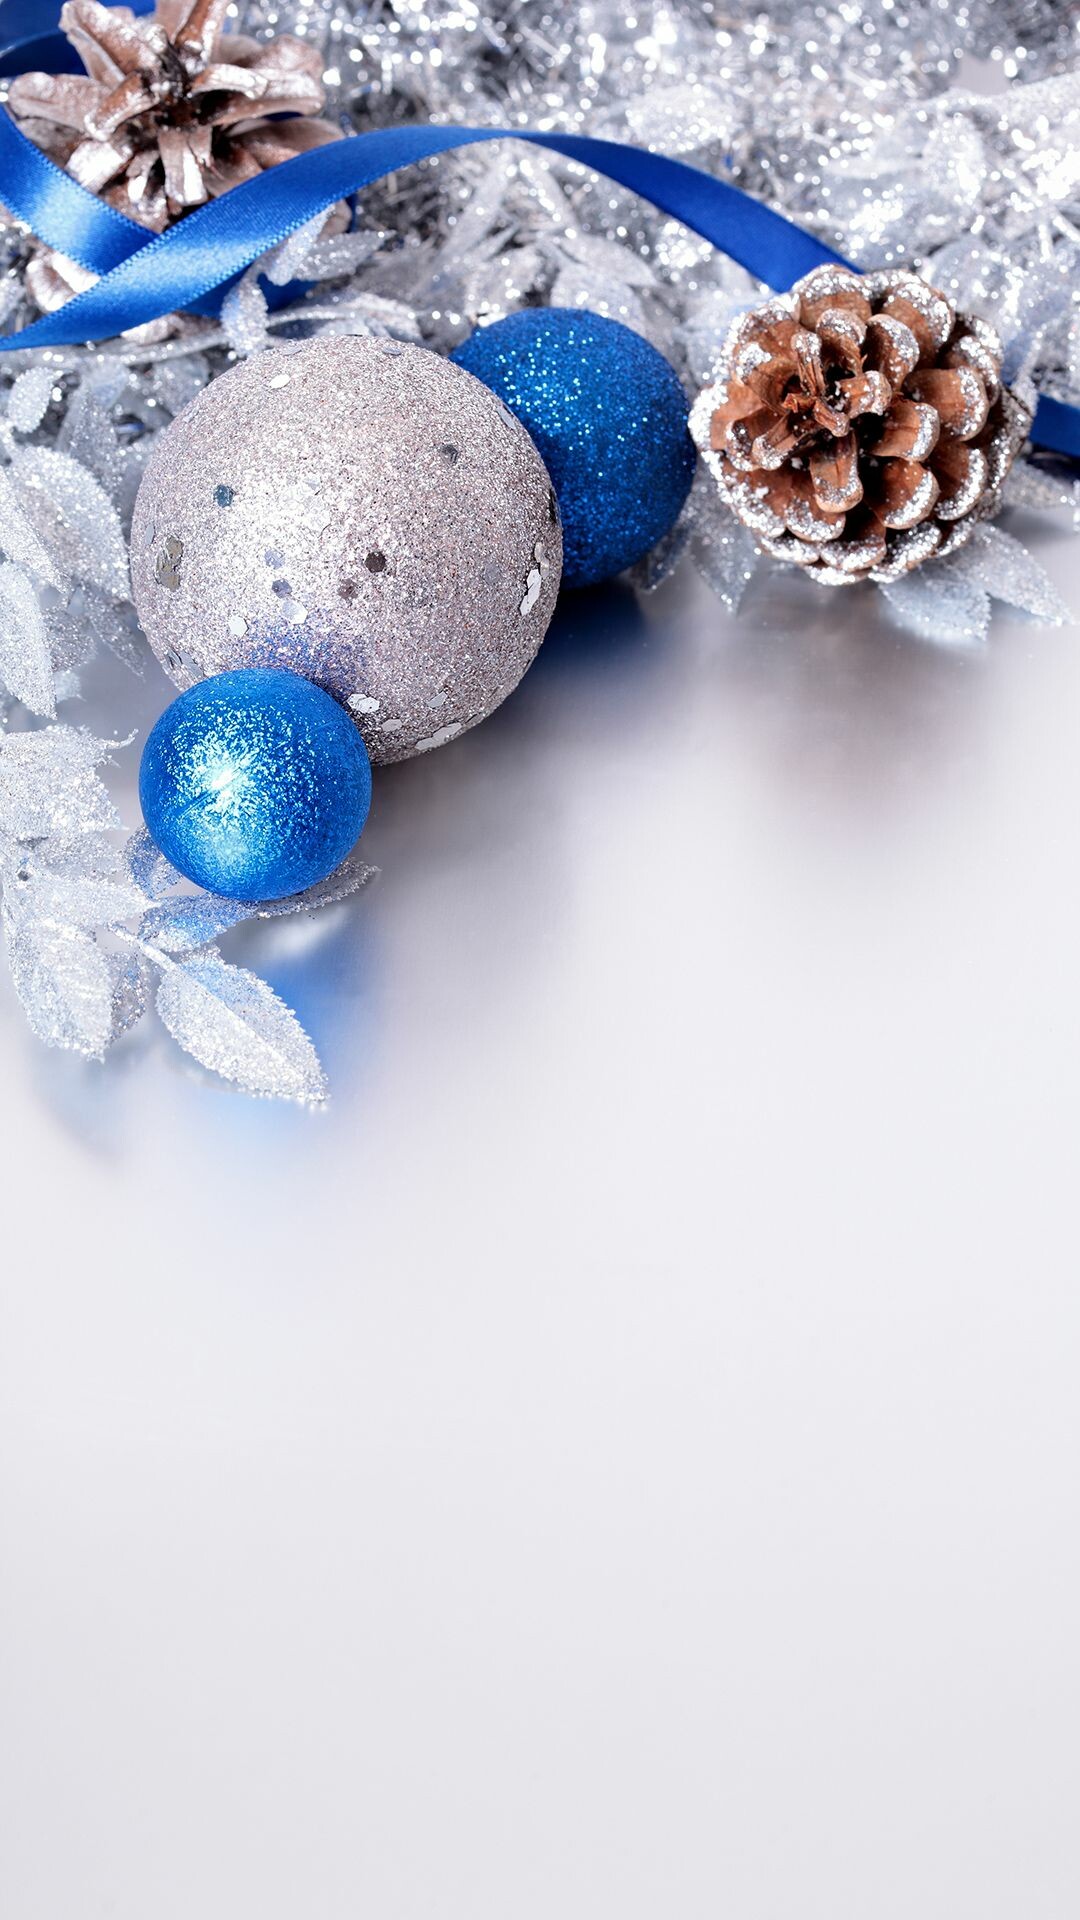 Christmas Ornament: A big part of holiday traditions, Decor. 1080x1920 Full HD Wallpaper.